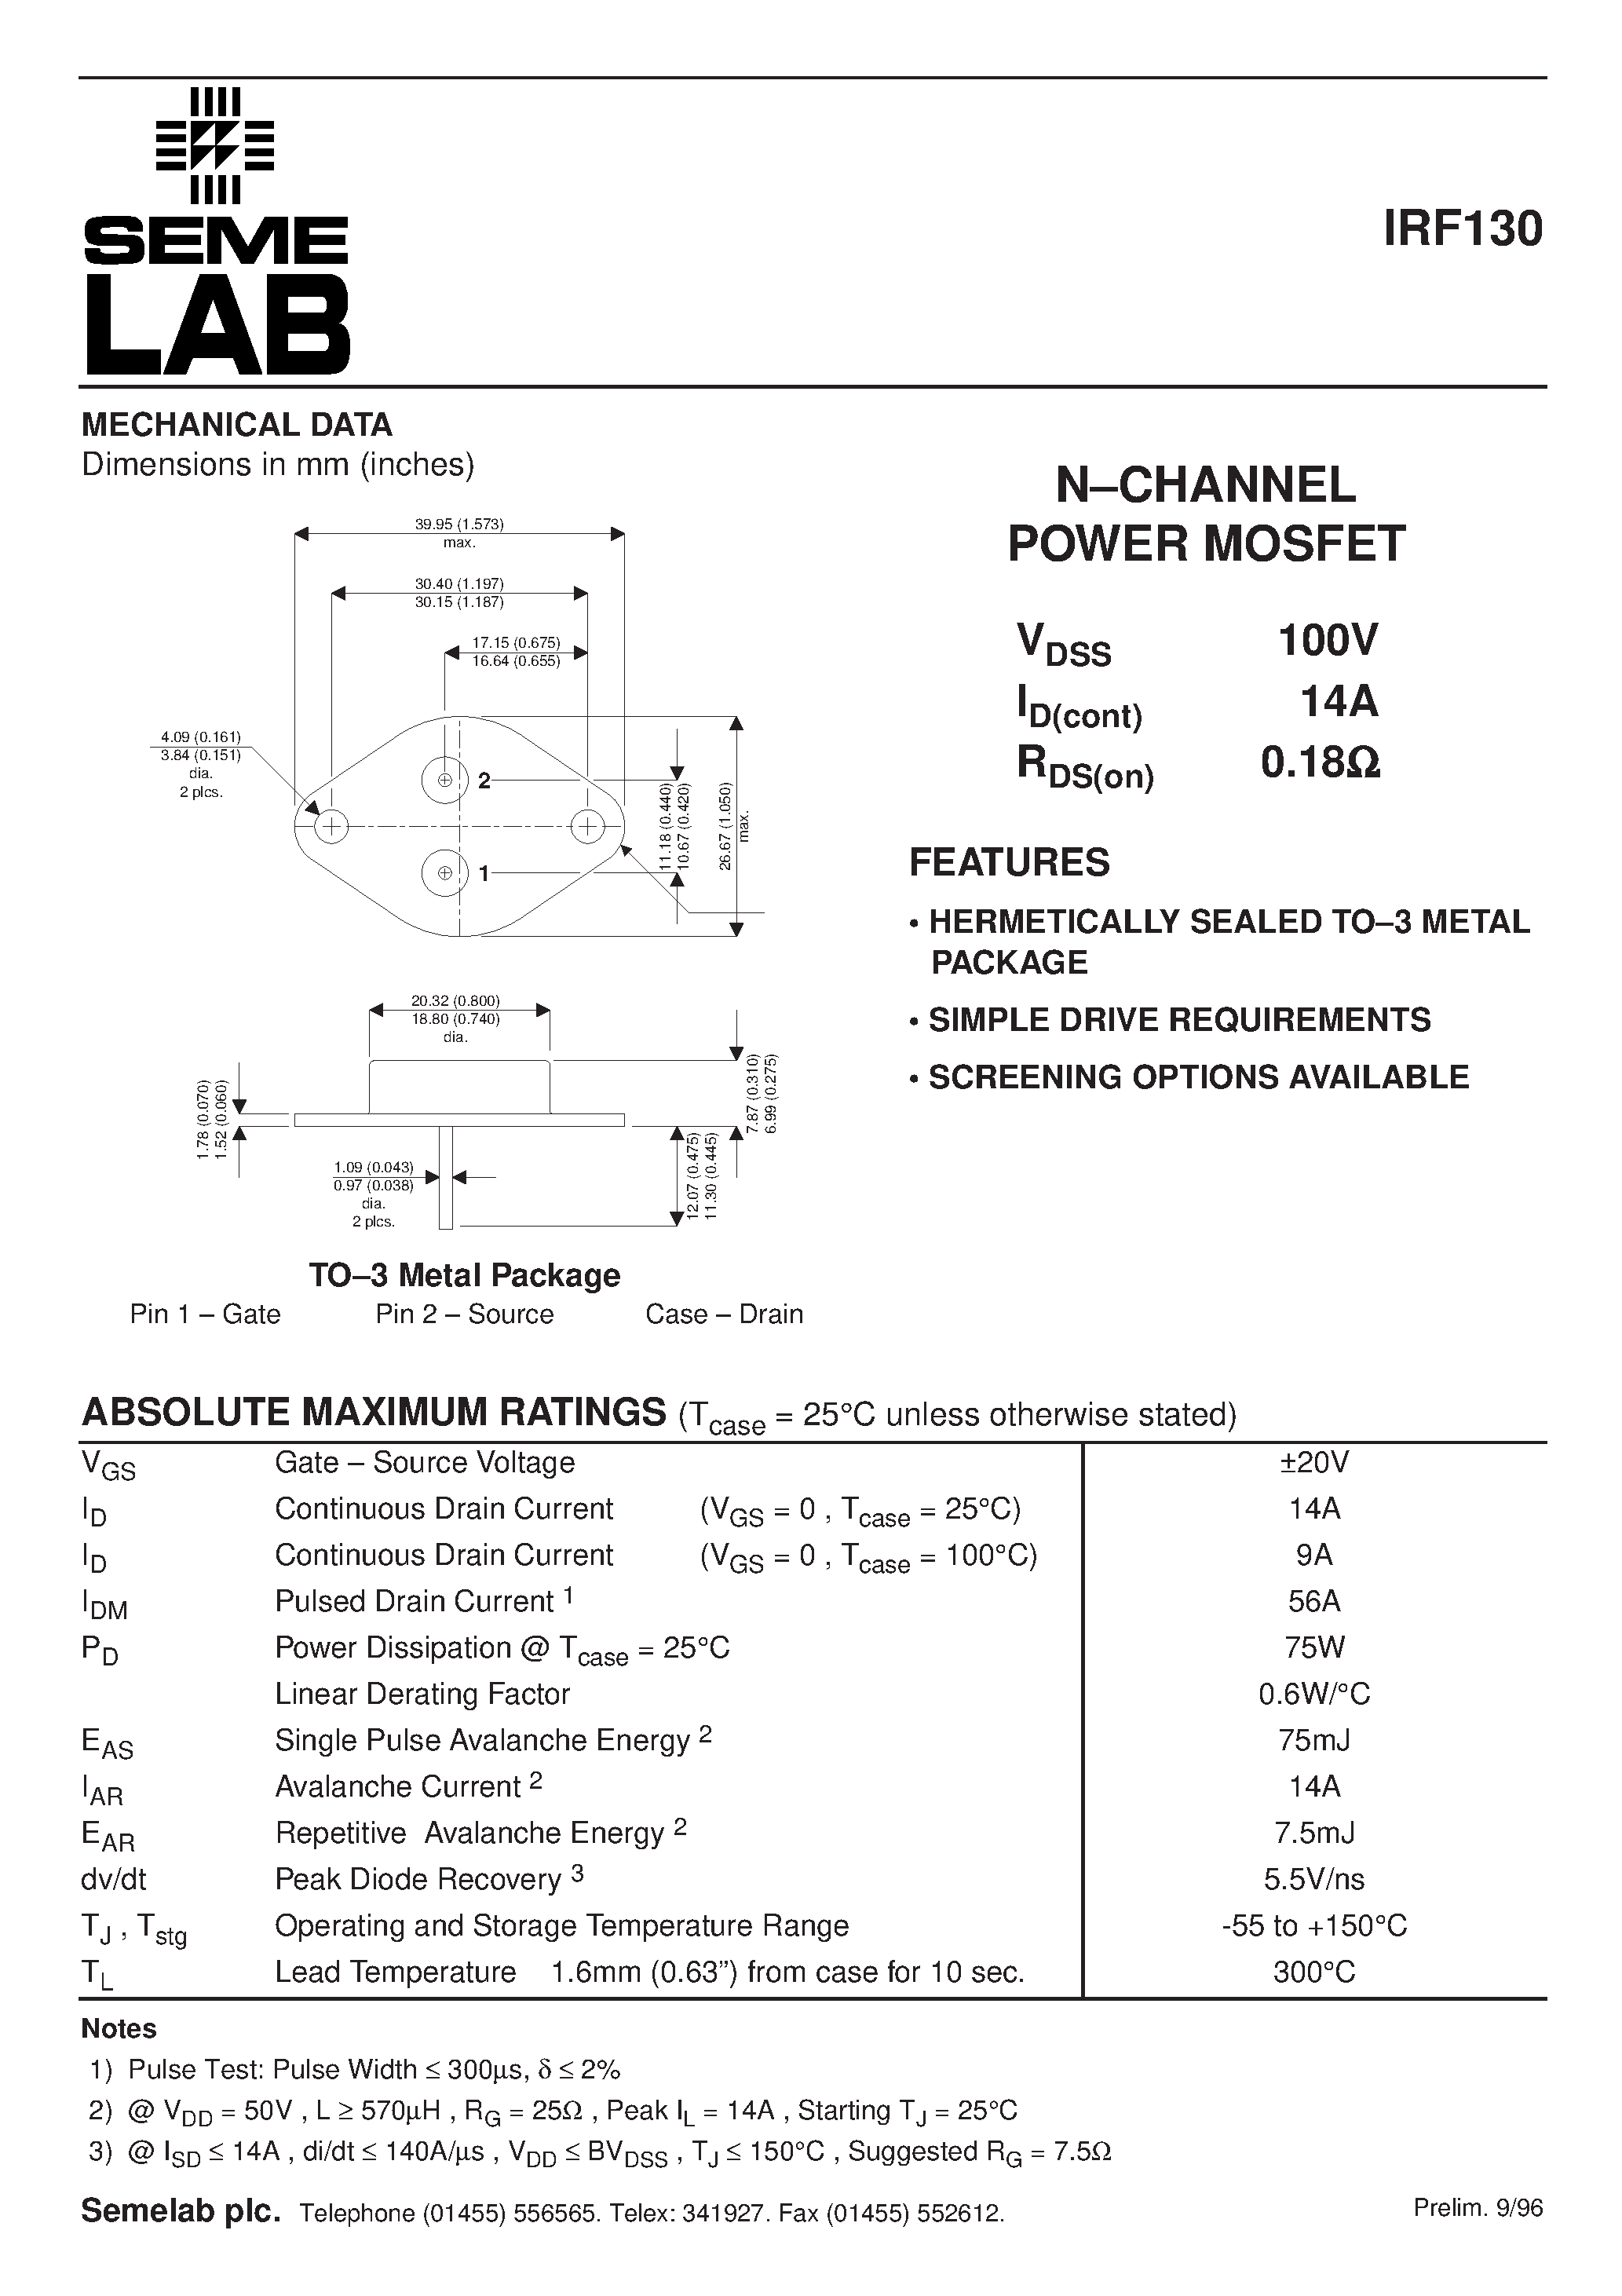 Даташит IRF130 - N-CHANNEL POWER MOSFET страница 1